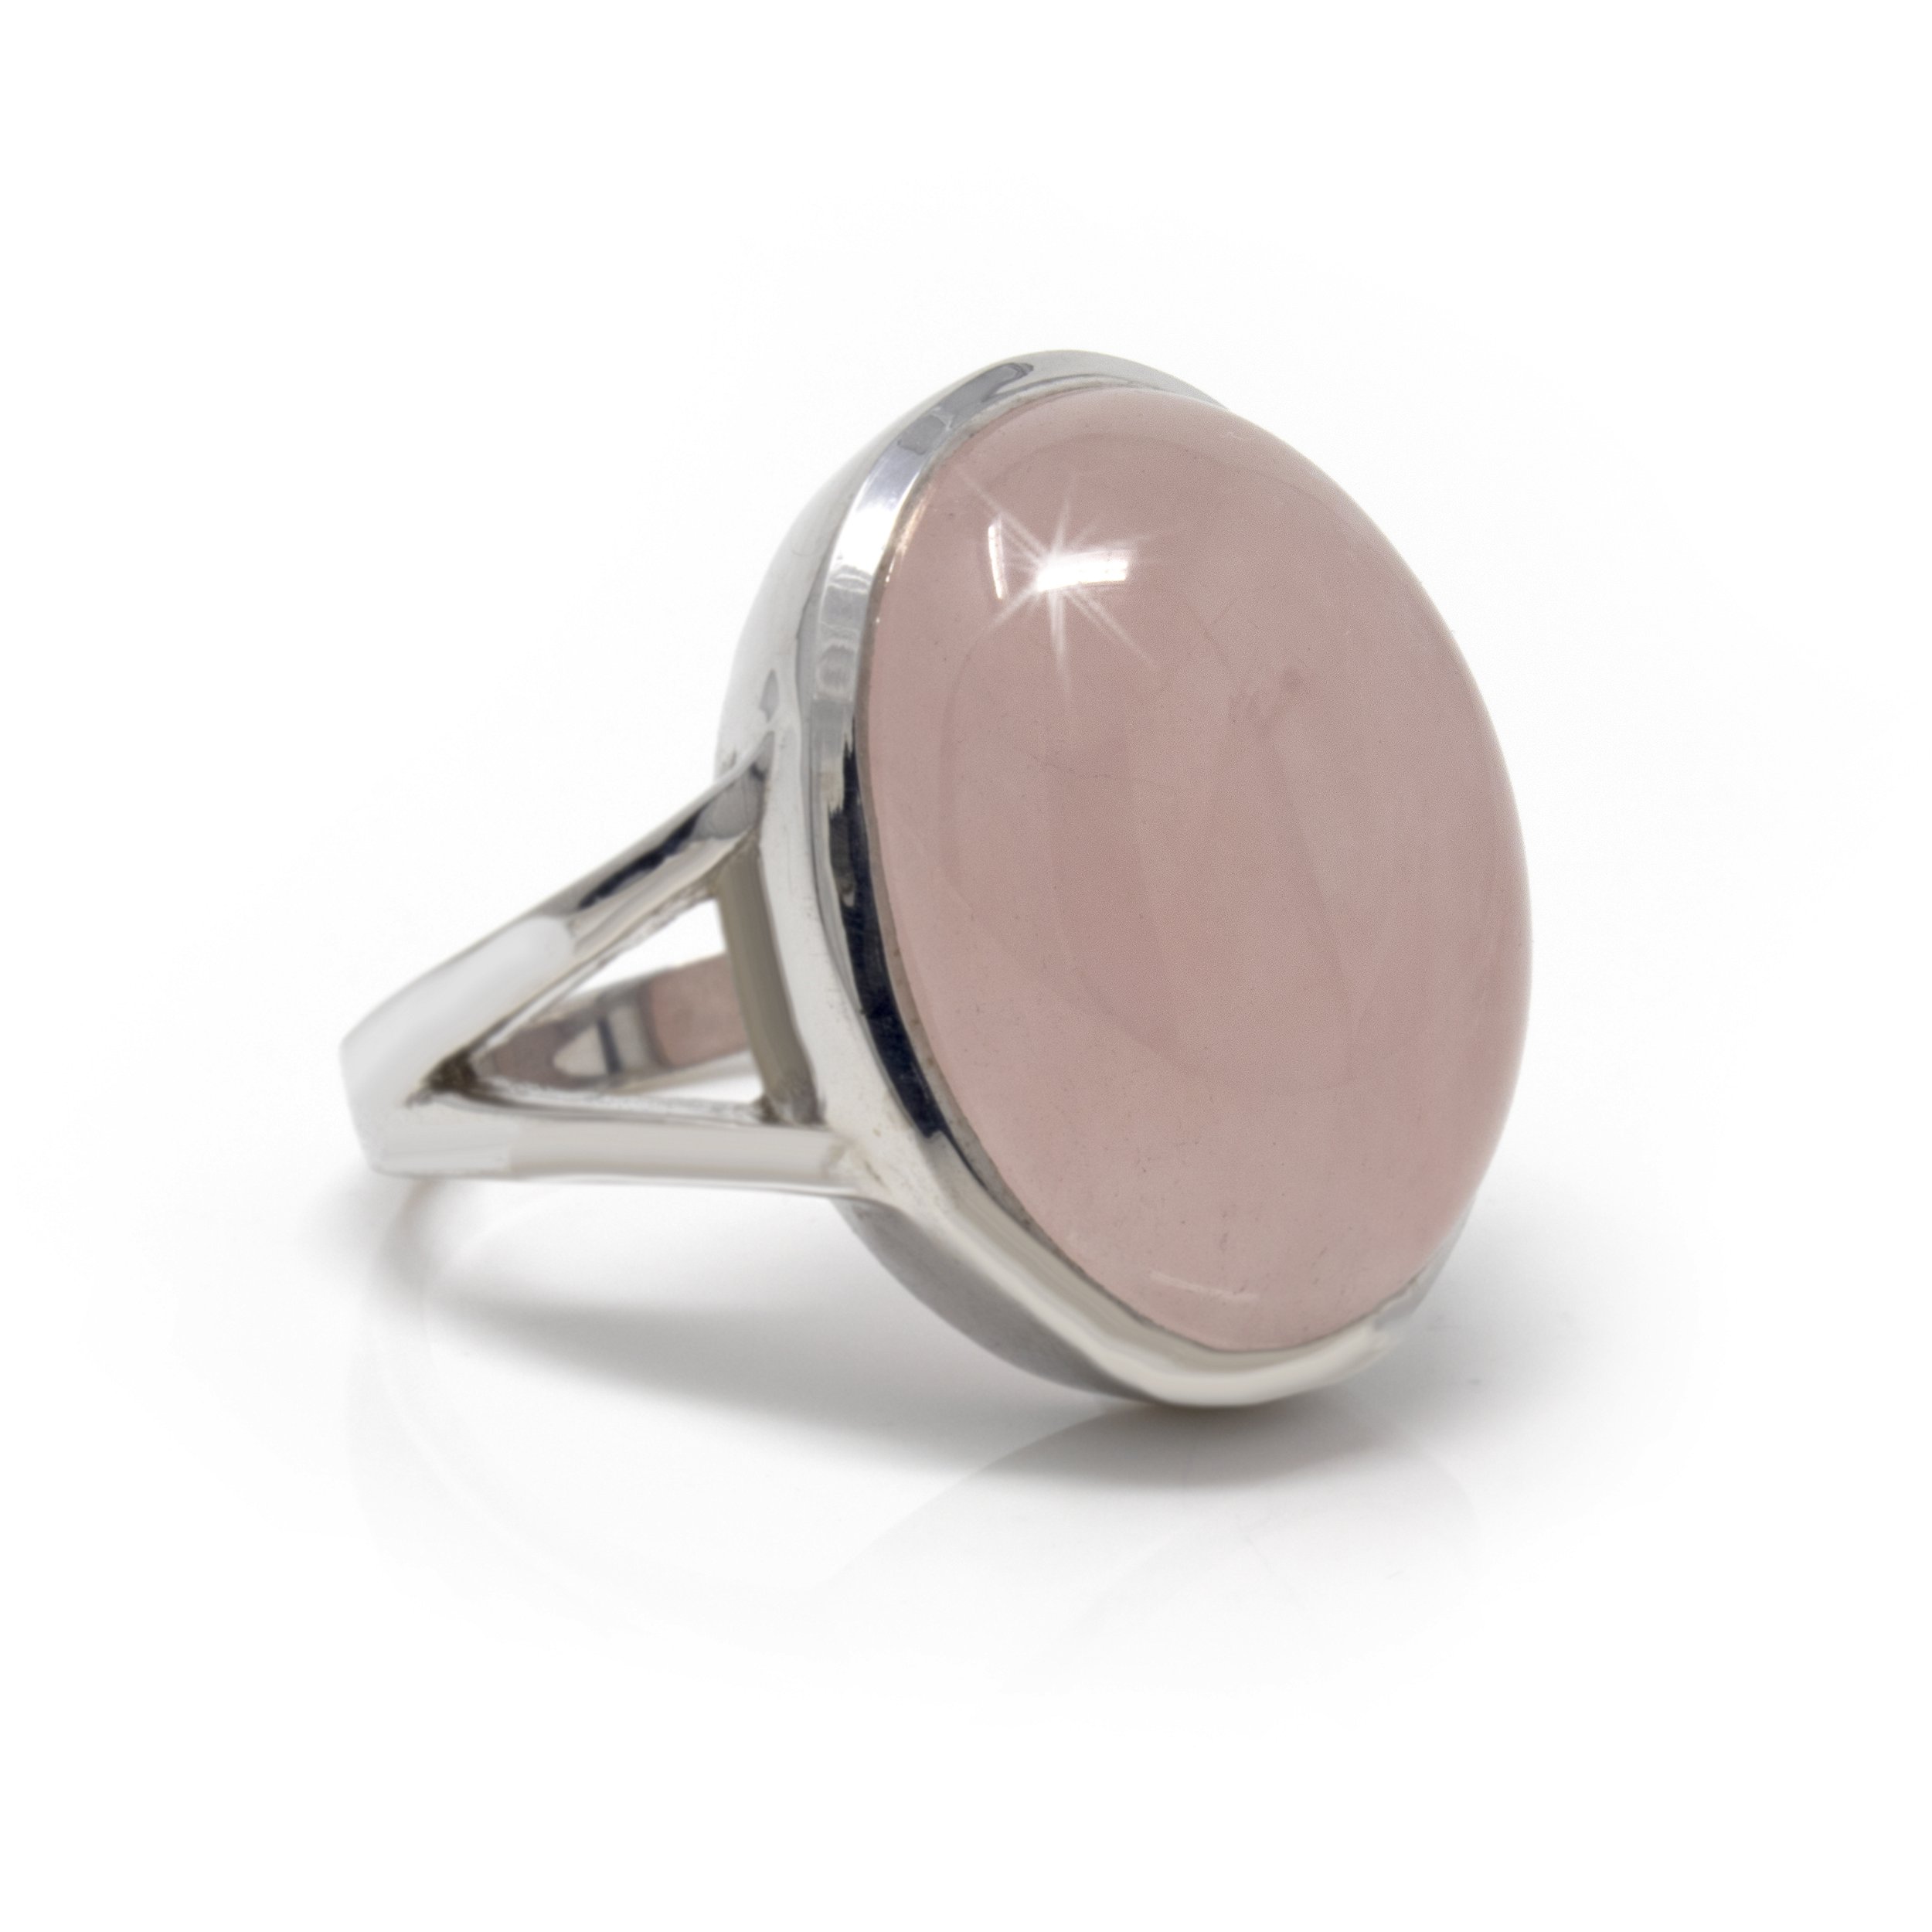 Rose Quartz Ring Size 8- Simple Oval Cabochon With Tall Silver Bezel & Narrow Cut Out On Band Top